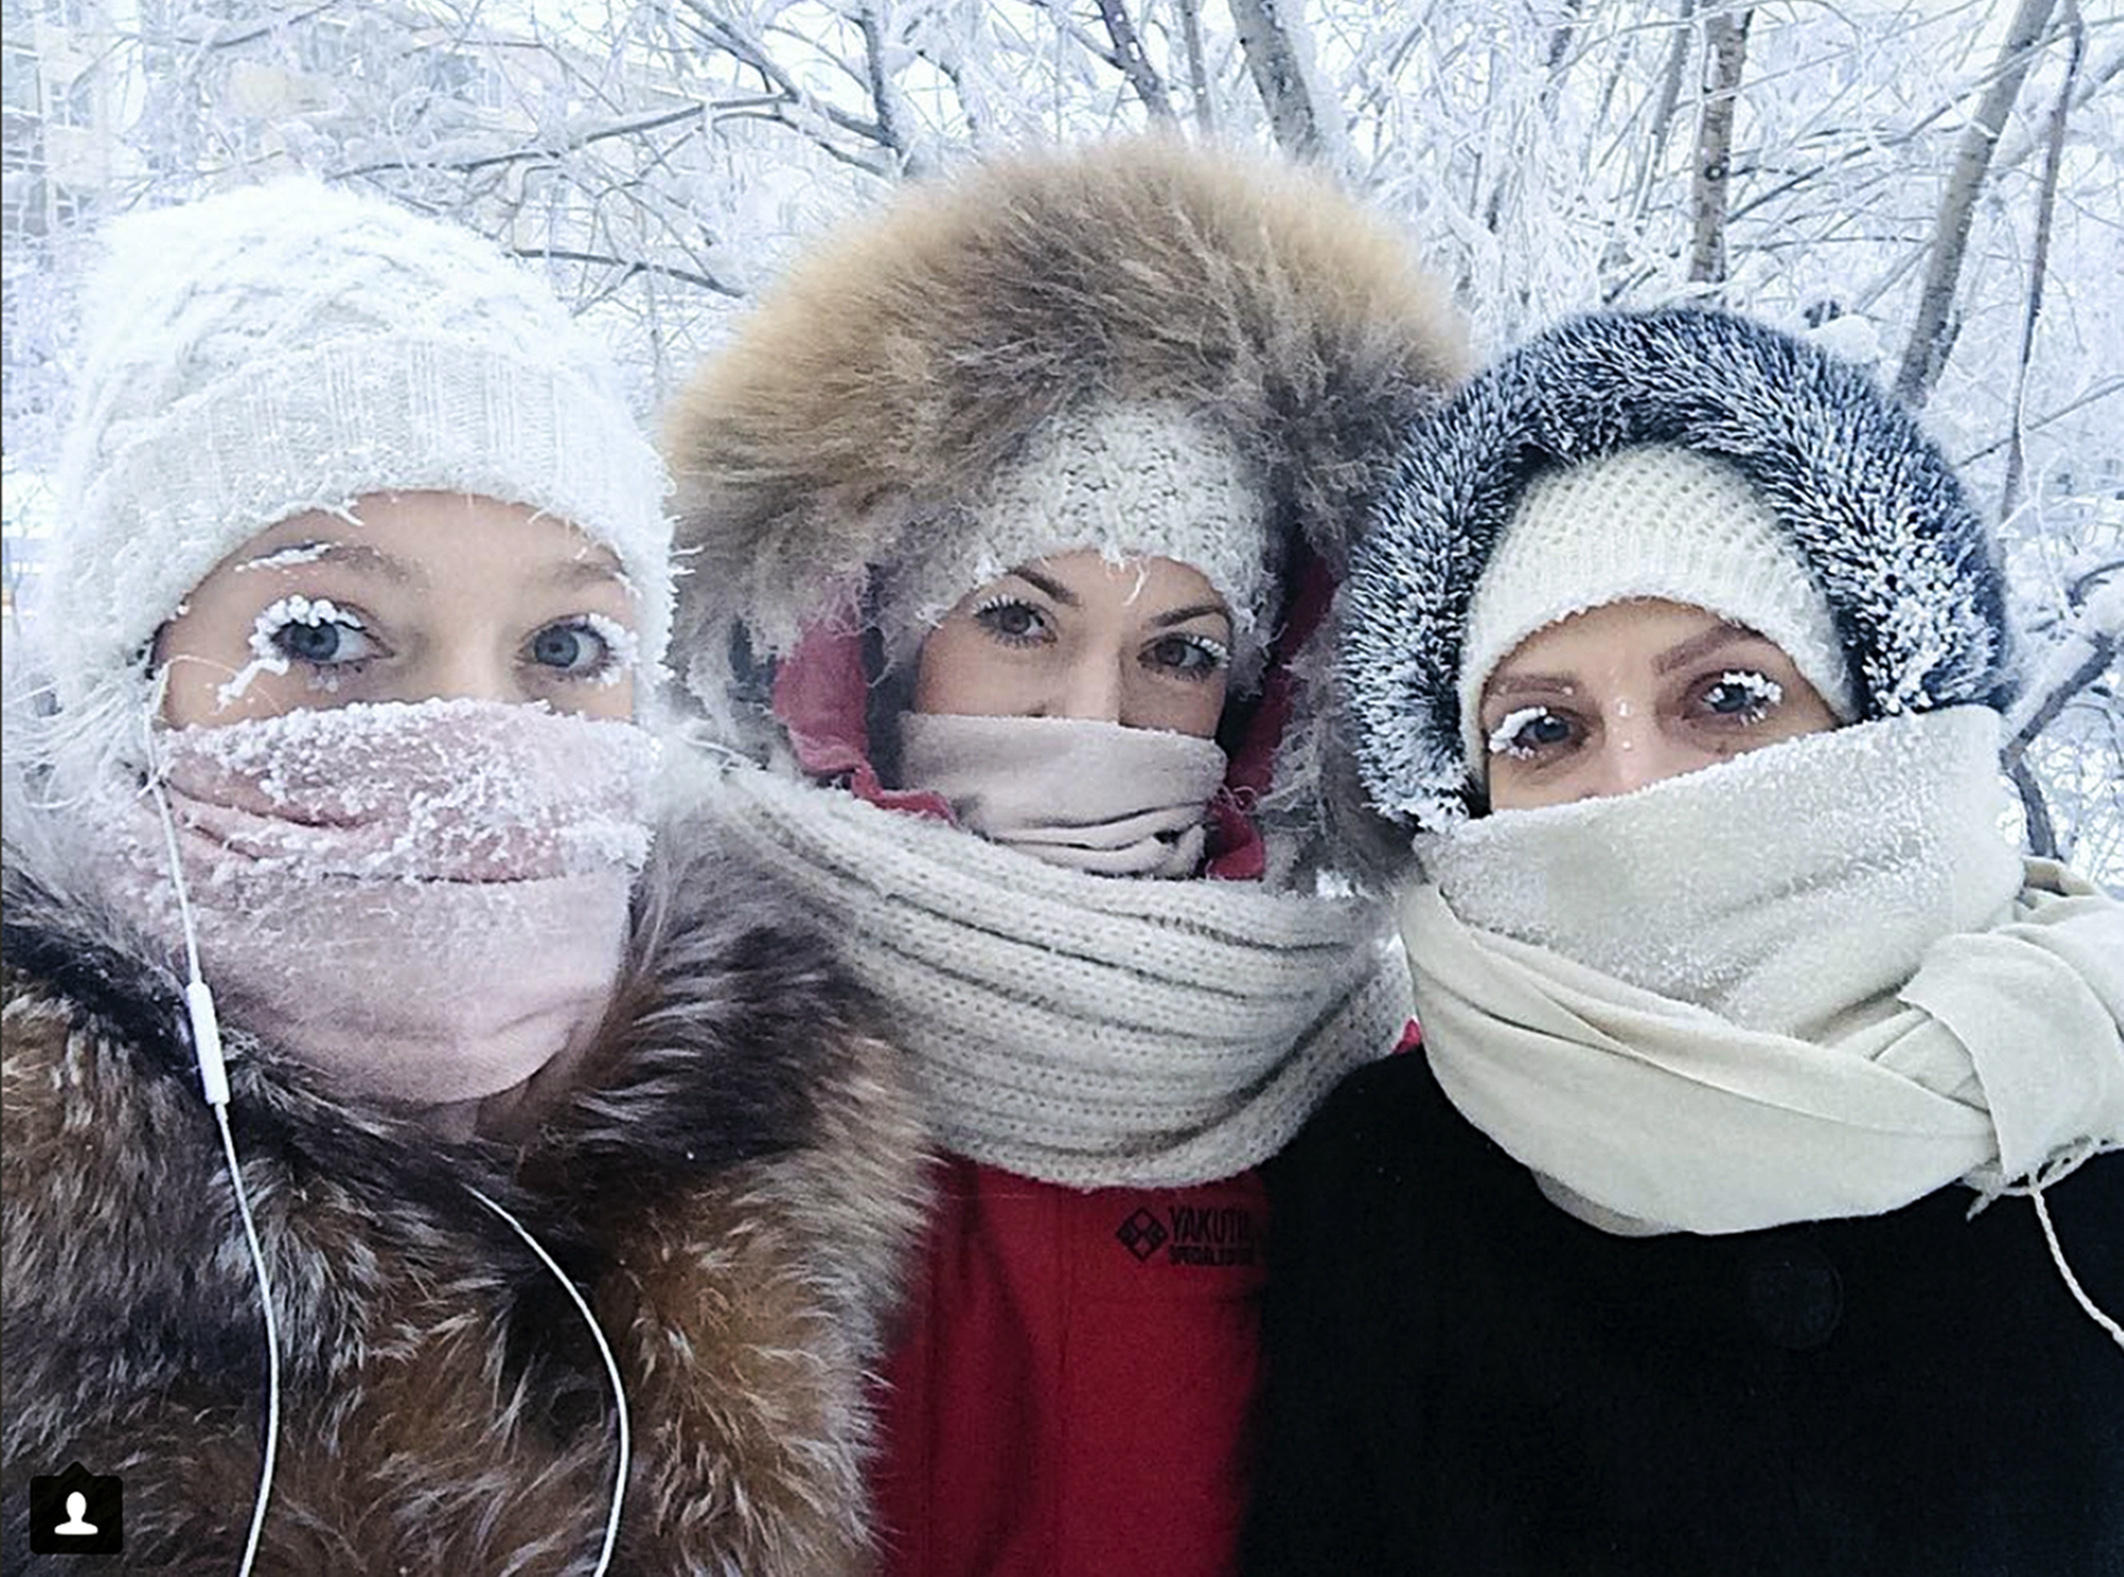 Oymyakon village in Siberia, Russia cold blamed for two deaths, frozen eyelashes - CBS News